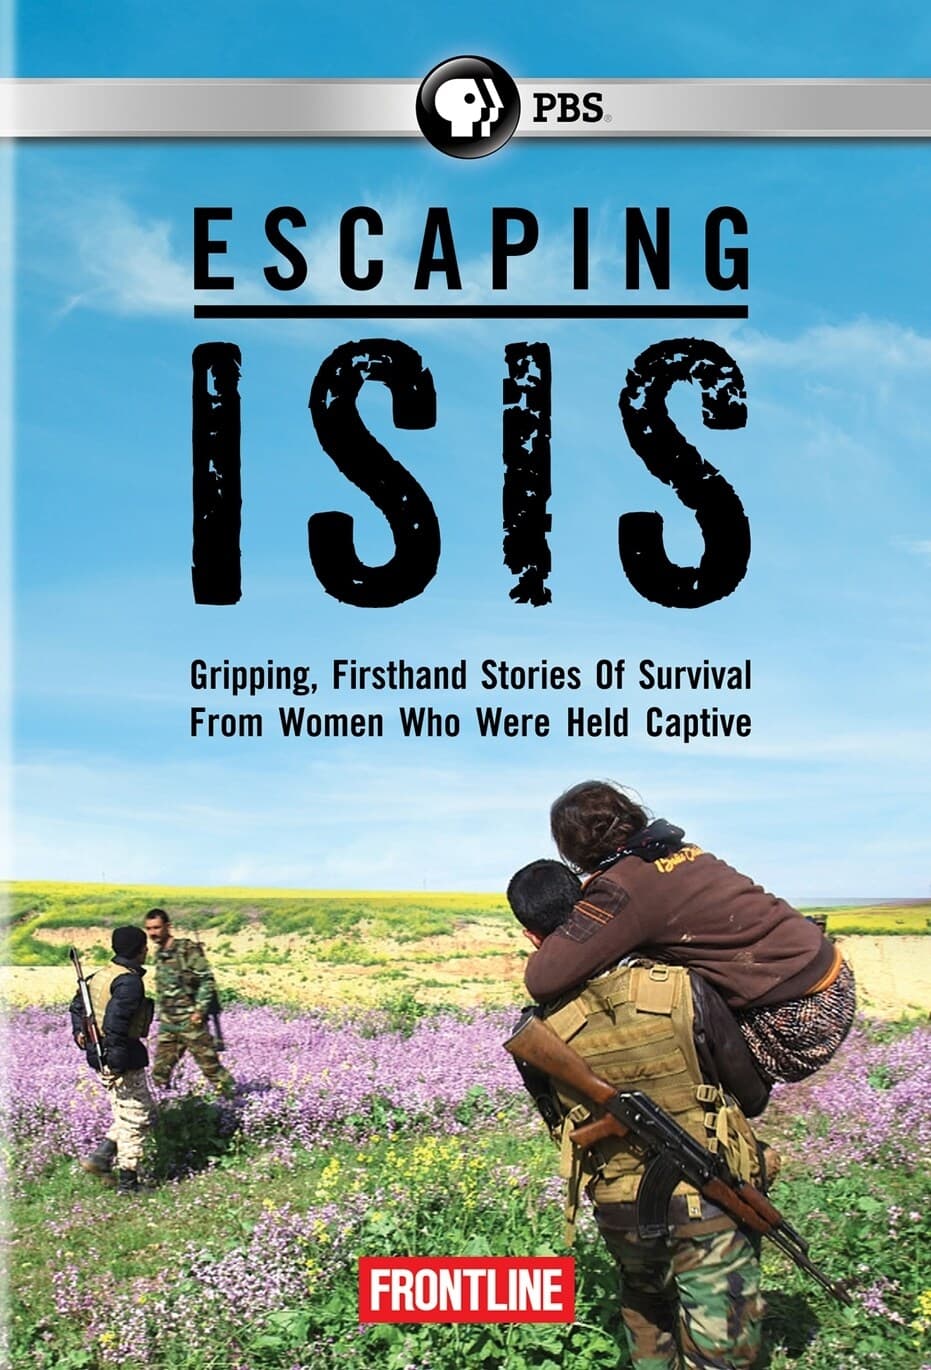 Frontline-Escaping ISIS